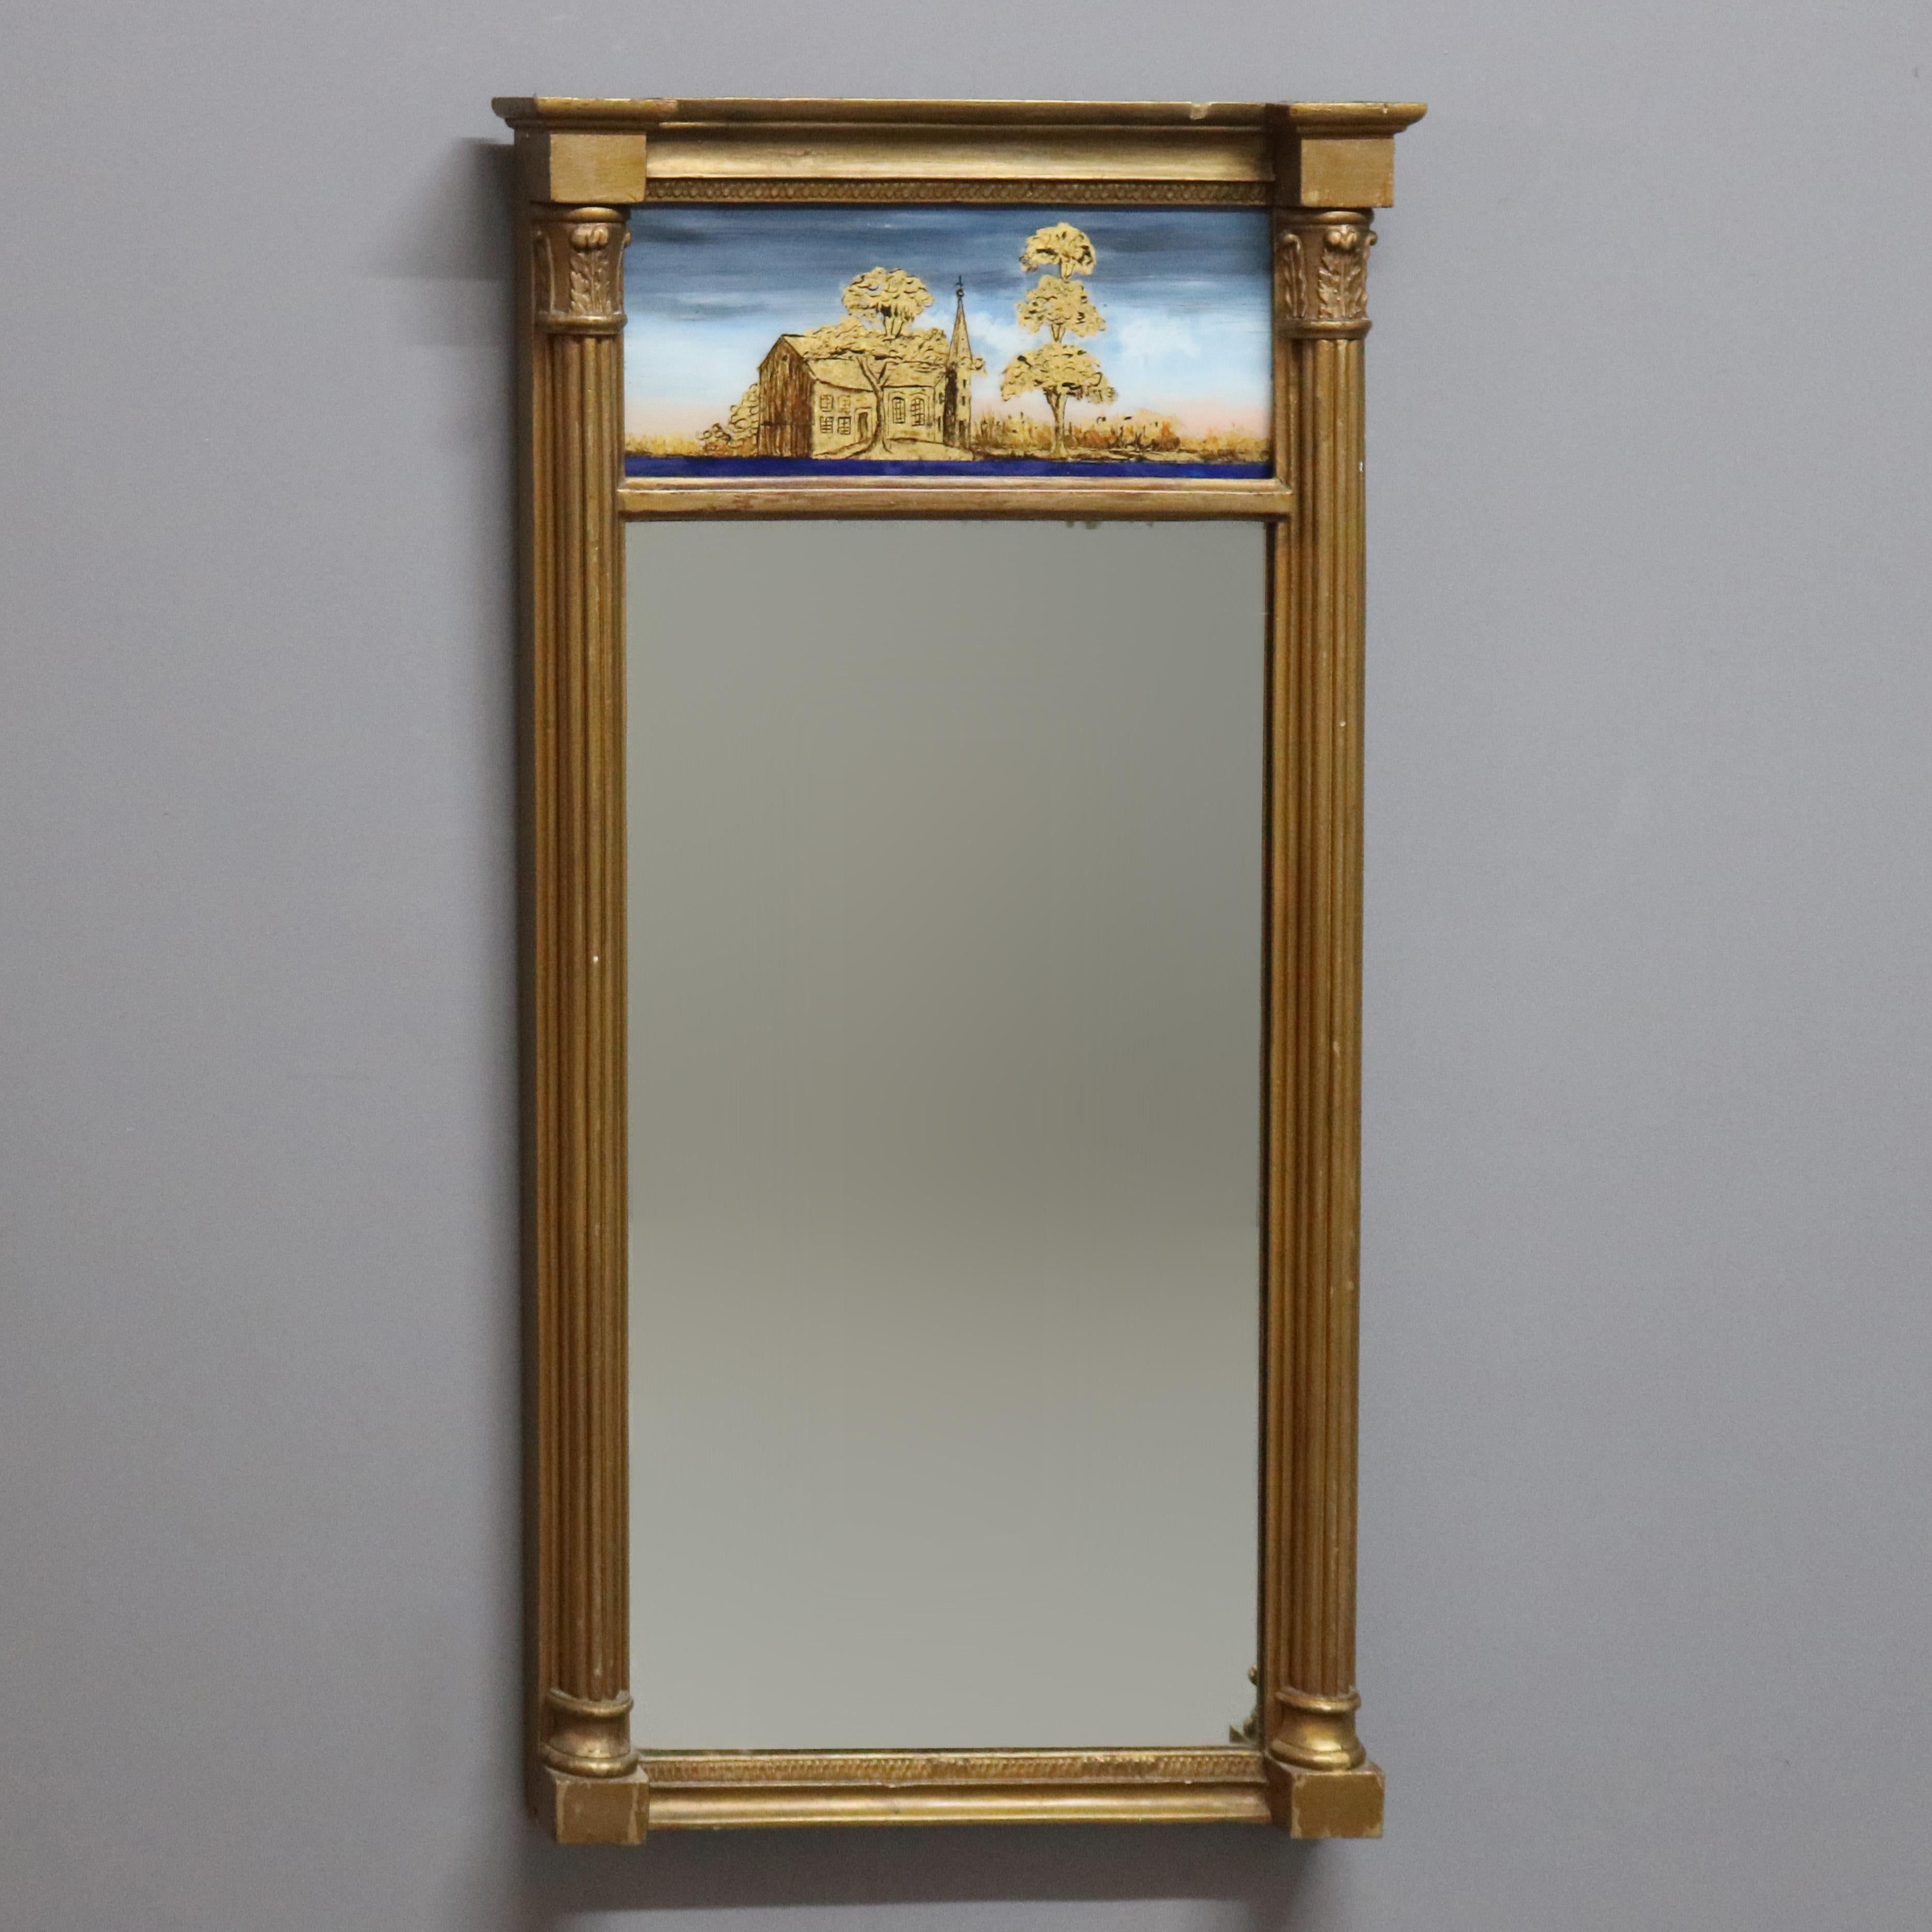 An antique wall mirror offers giltwood construction with reverse painted upper panel having countryside scene with church, c1890

Measures - 36